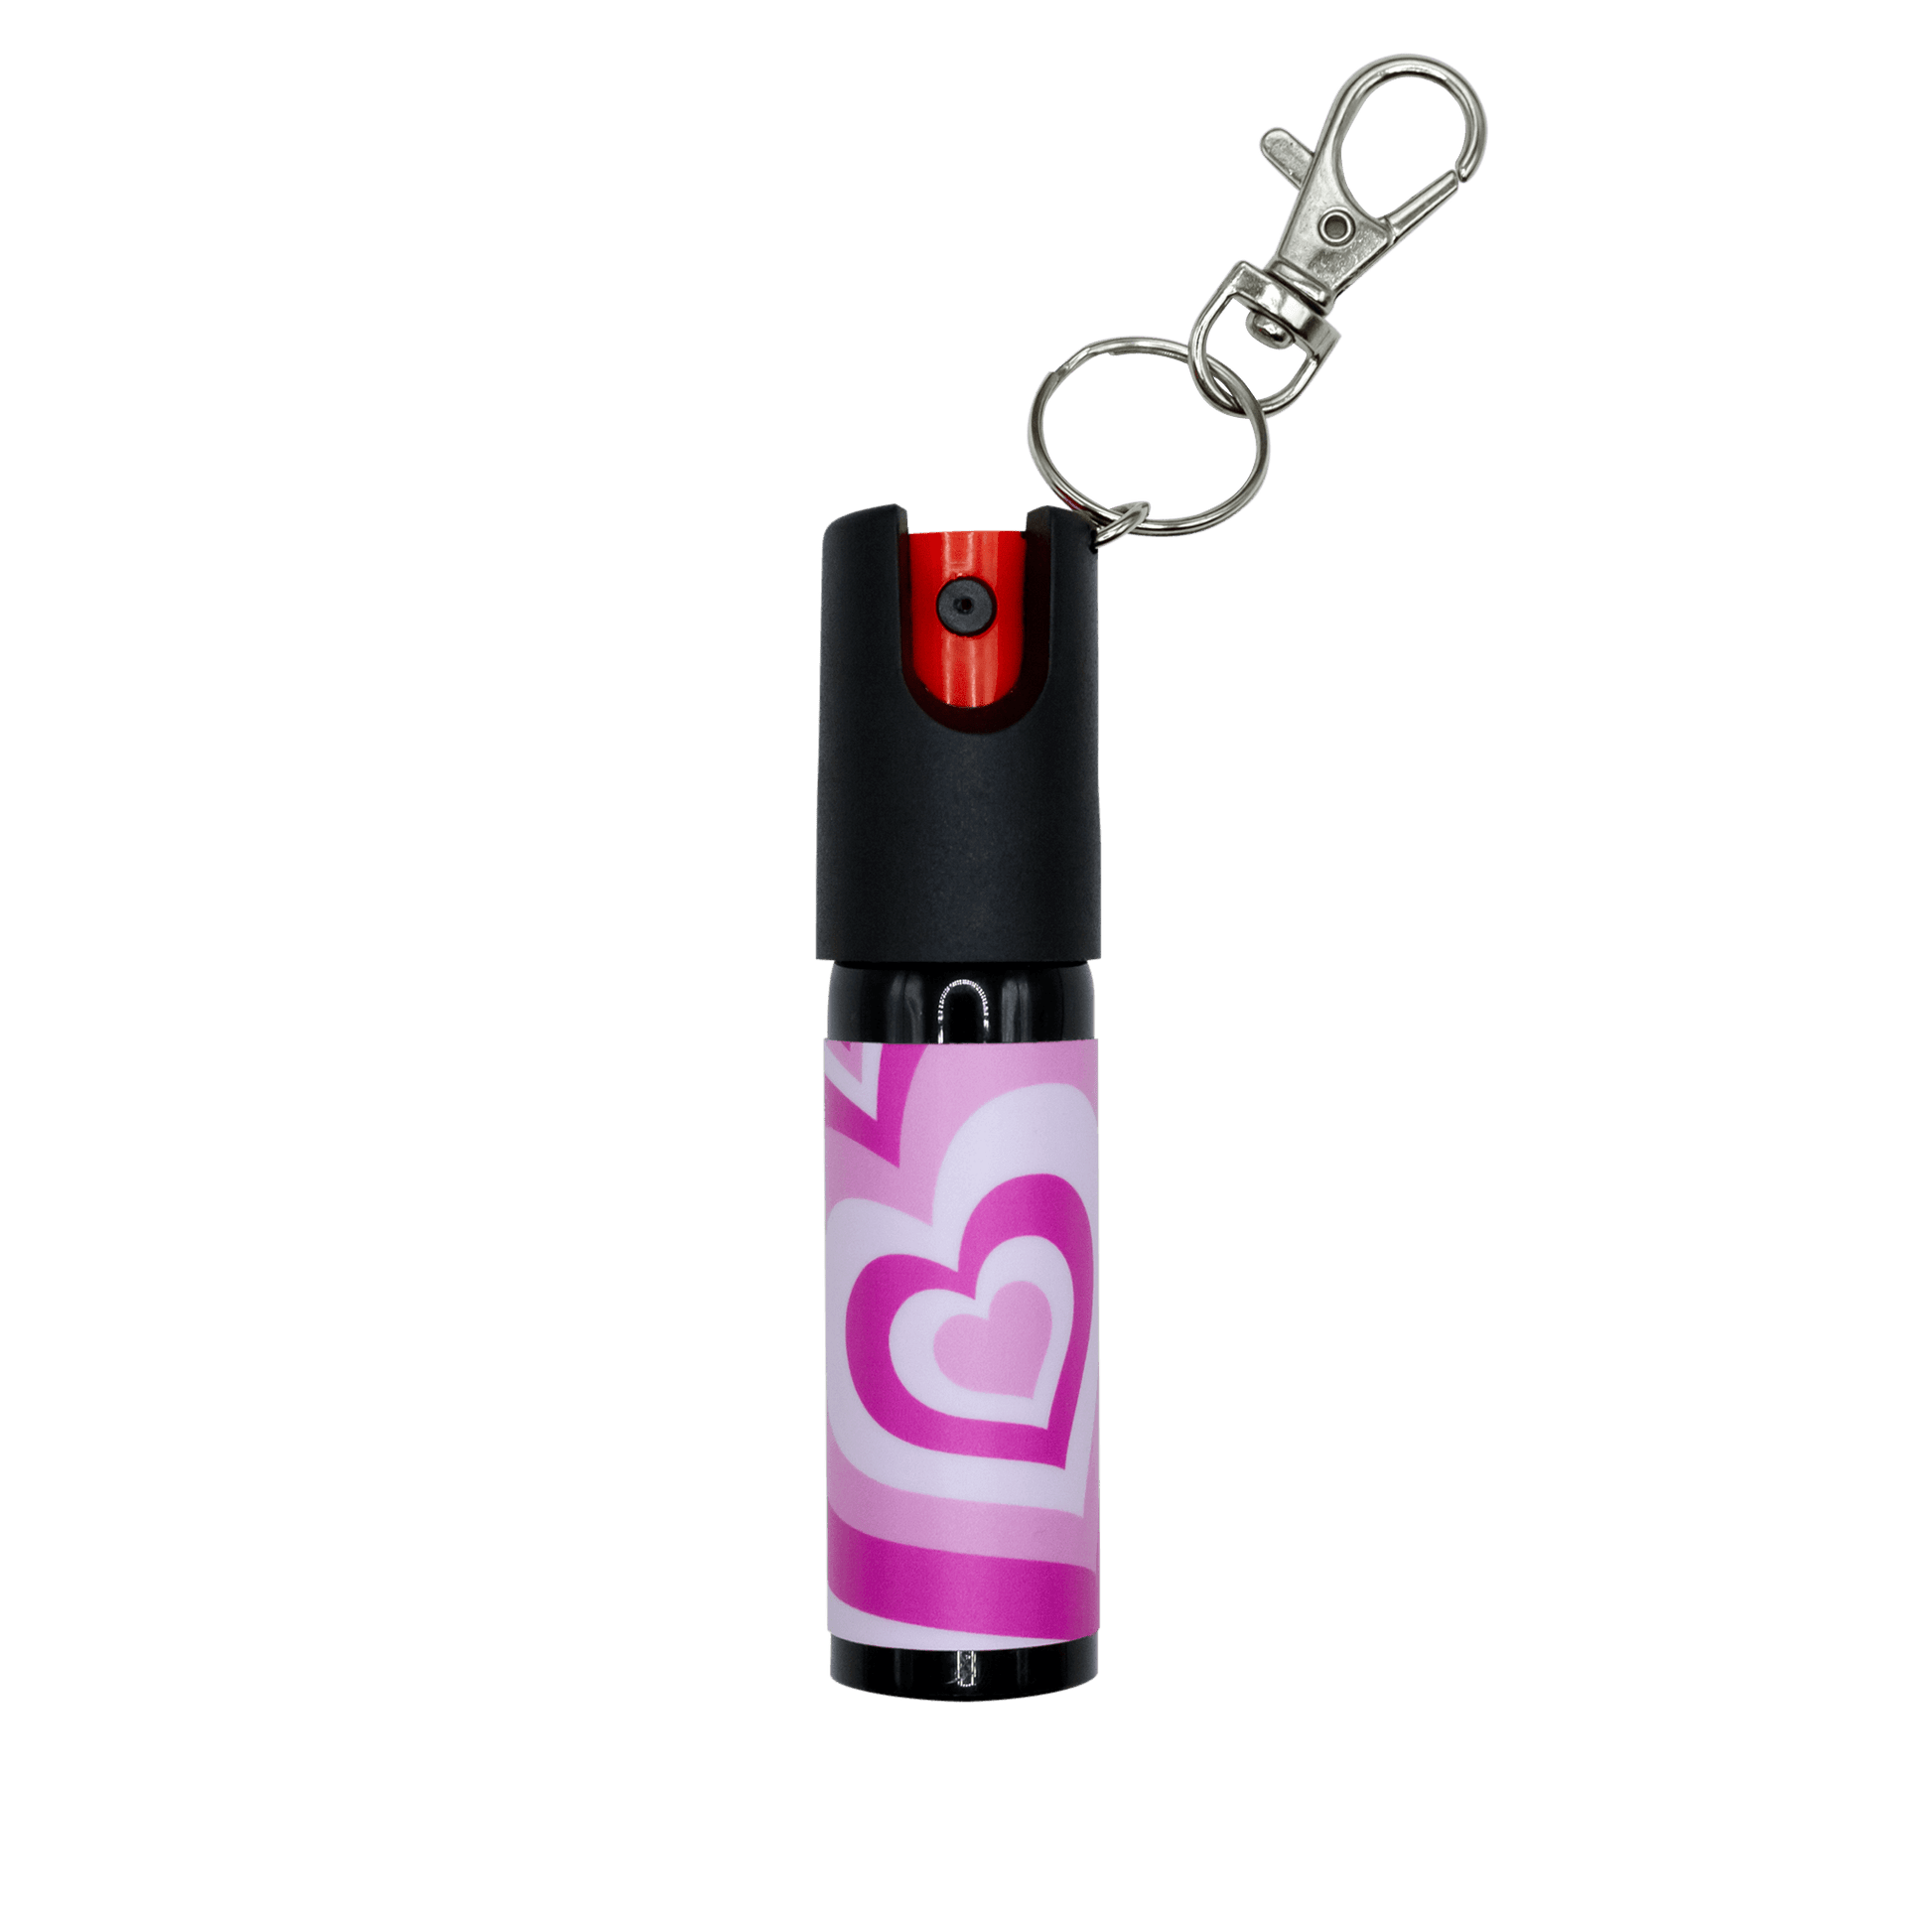 SDK Pepper Spray Pink Hearts (20ml compact Pepper Spray with keychain attachment)